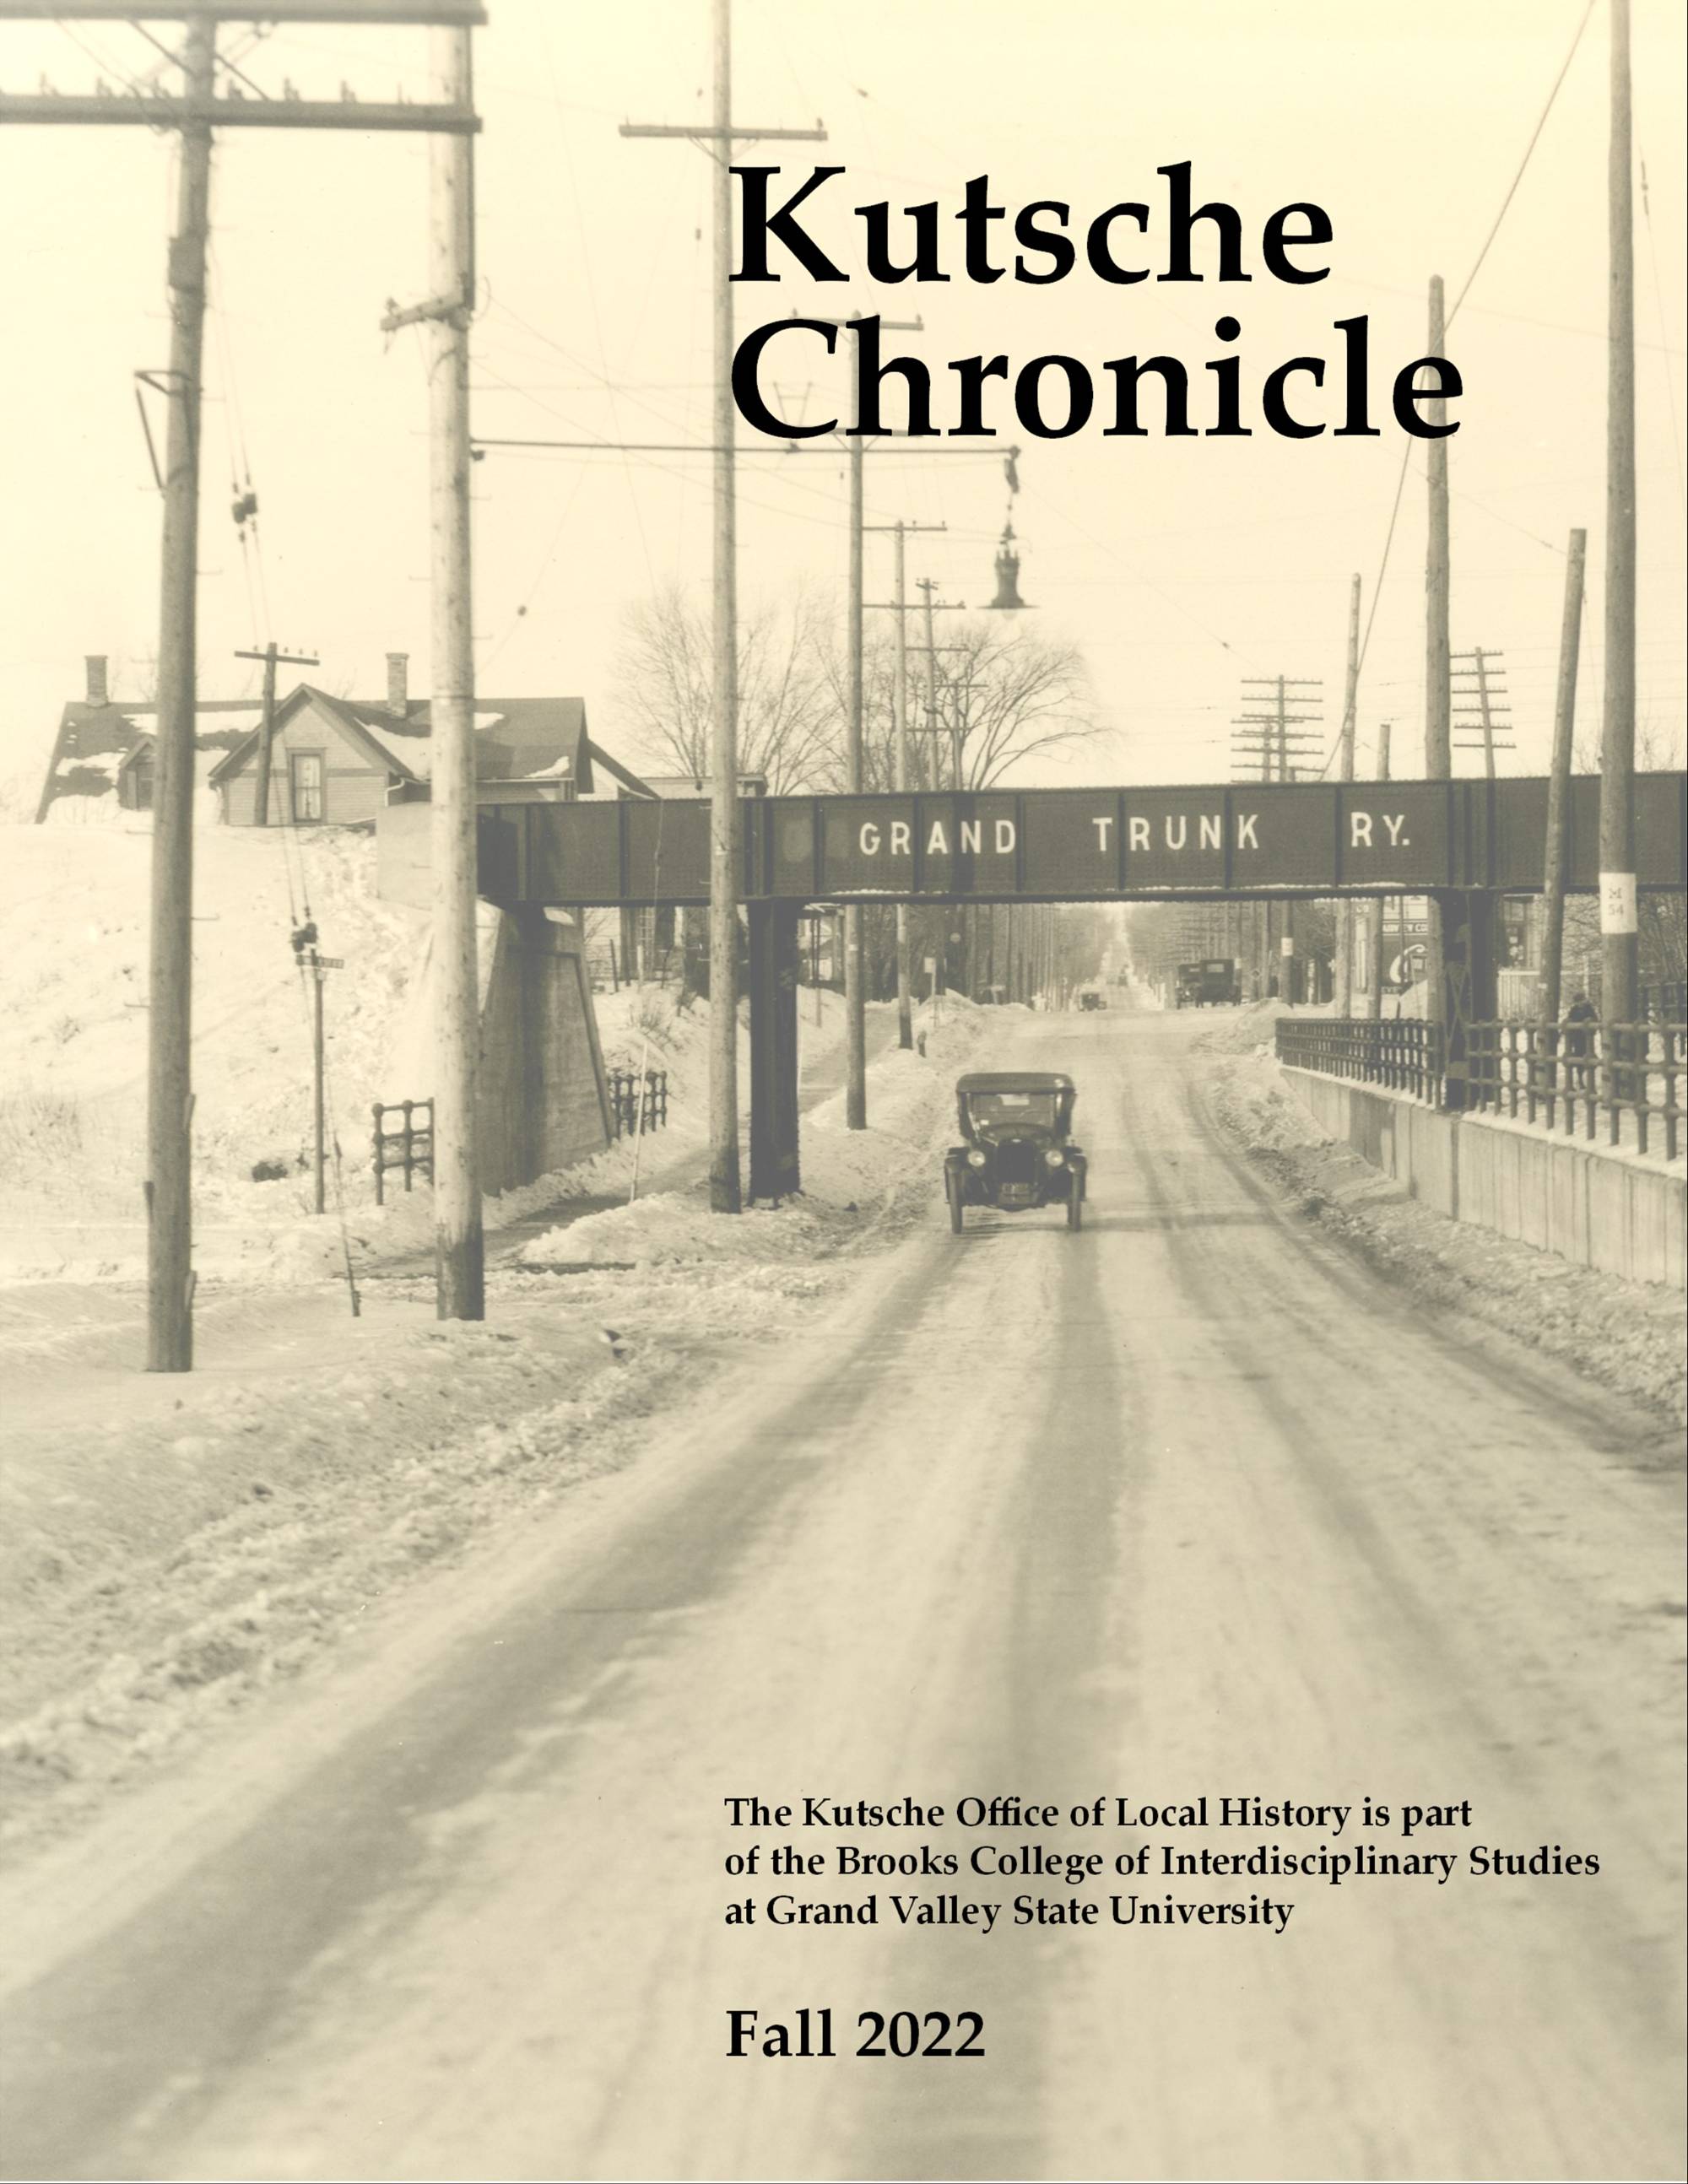 Cover of the Fall 2022 Kutsche Chronicle featuring a vehicle driving underneath a railway bridge in Grand Rapids circa 1920s.